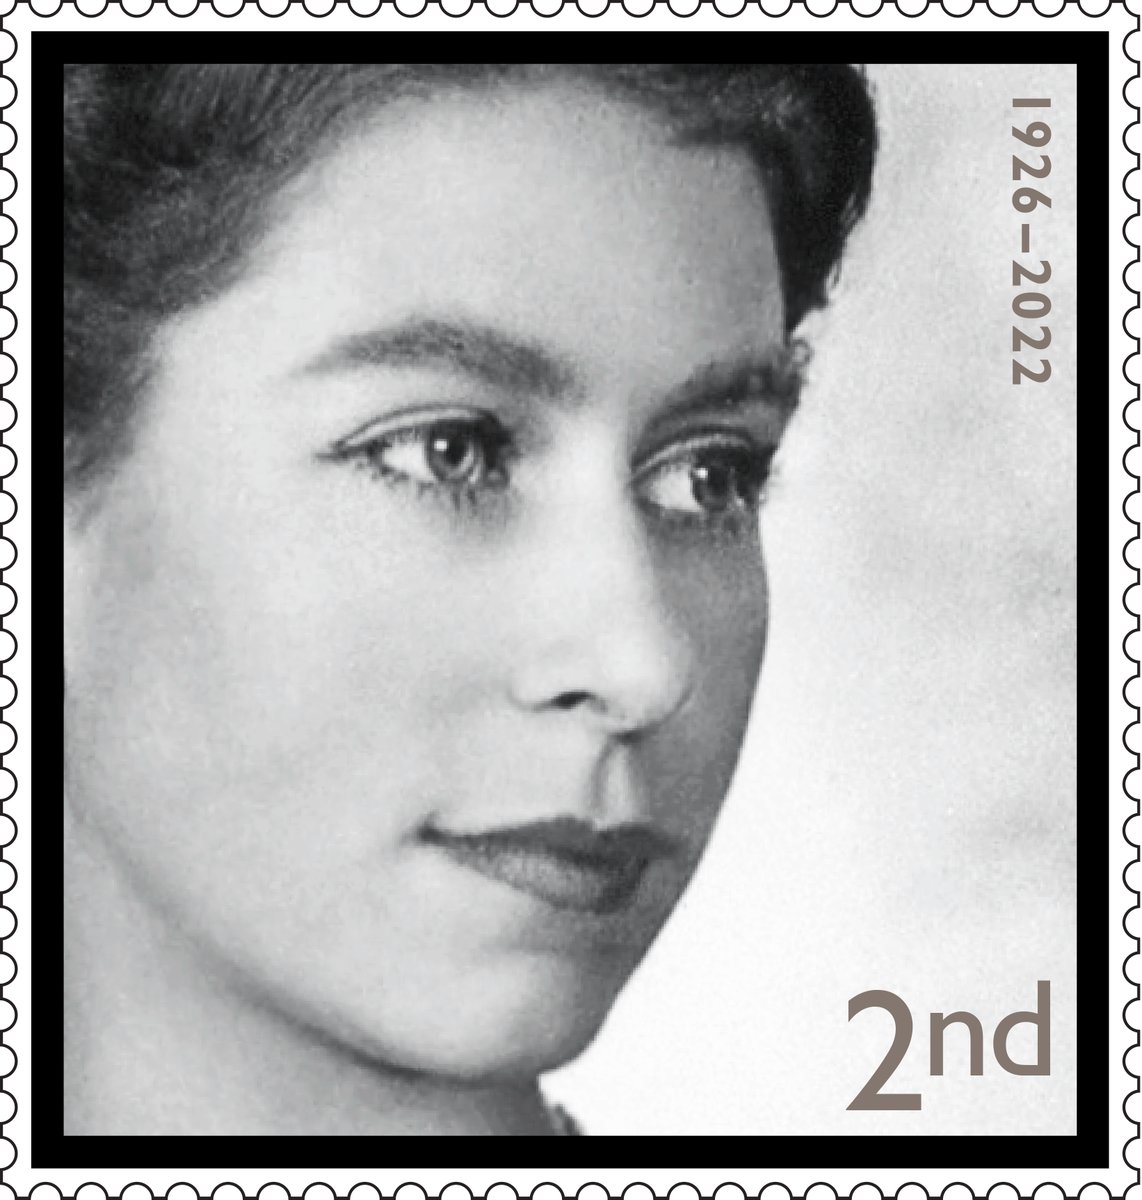 The Royal Mail is issuing special commemorative stamps marking the life of Queen Elizabeth II. They include four of the most famous portraits of Her Late Majesty. Among them is one of the photos taken in the early part of her reign by Dorothy Wilding.